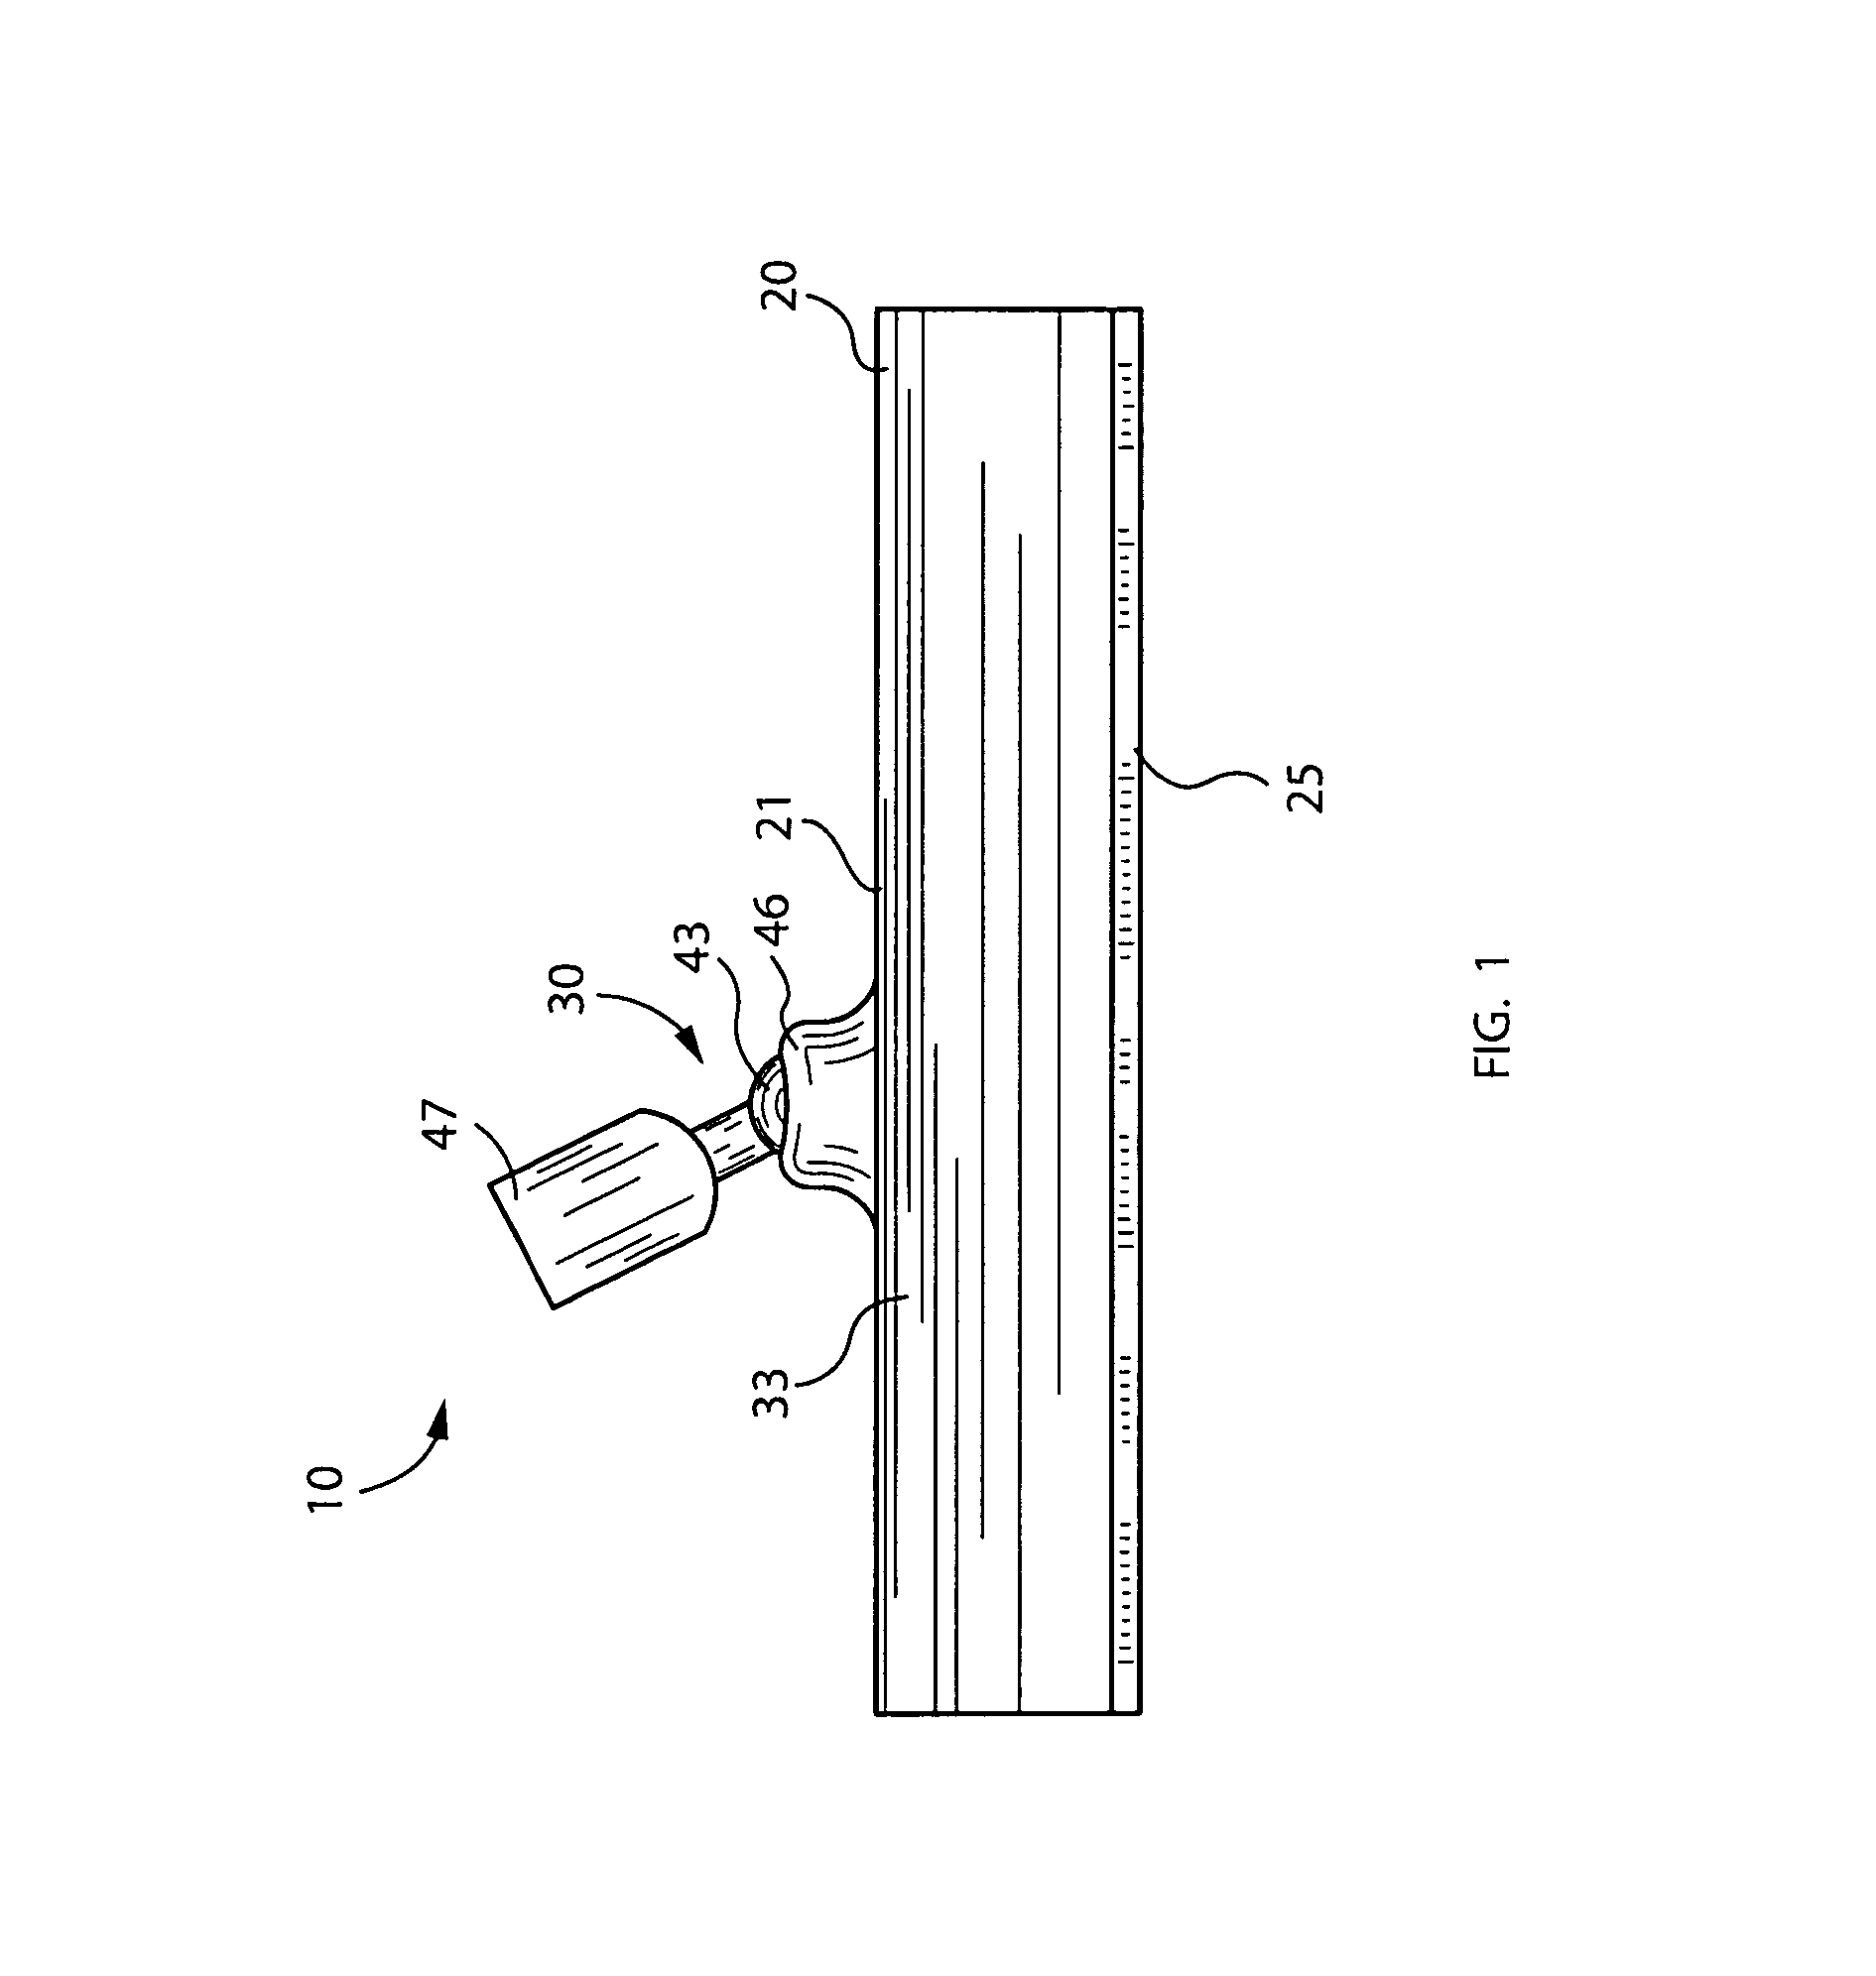 Cleaning tool for removing undesirable marine growth from a support surface and associated method